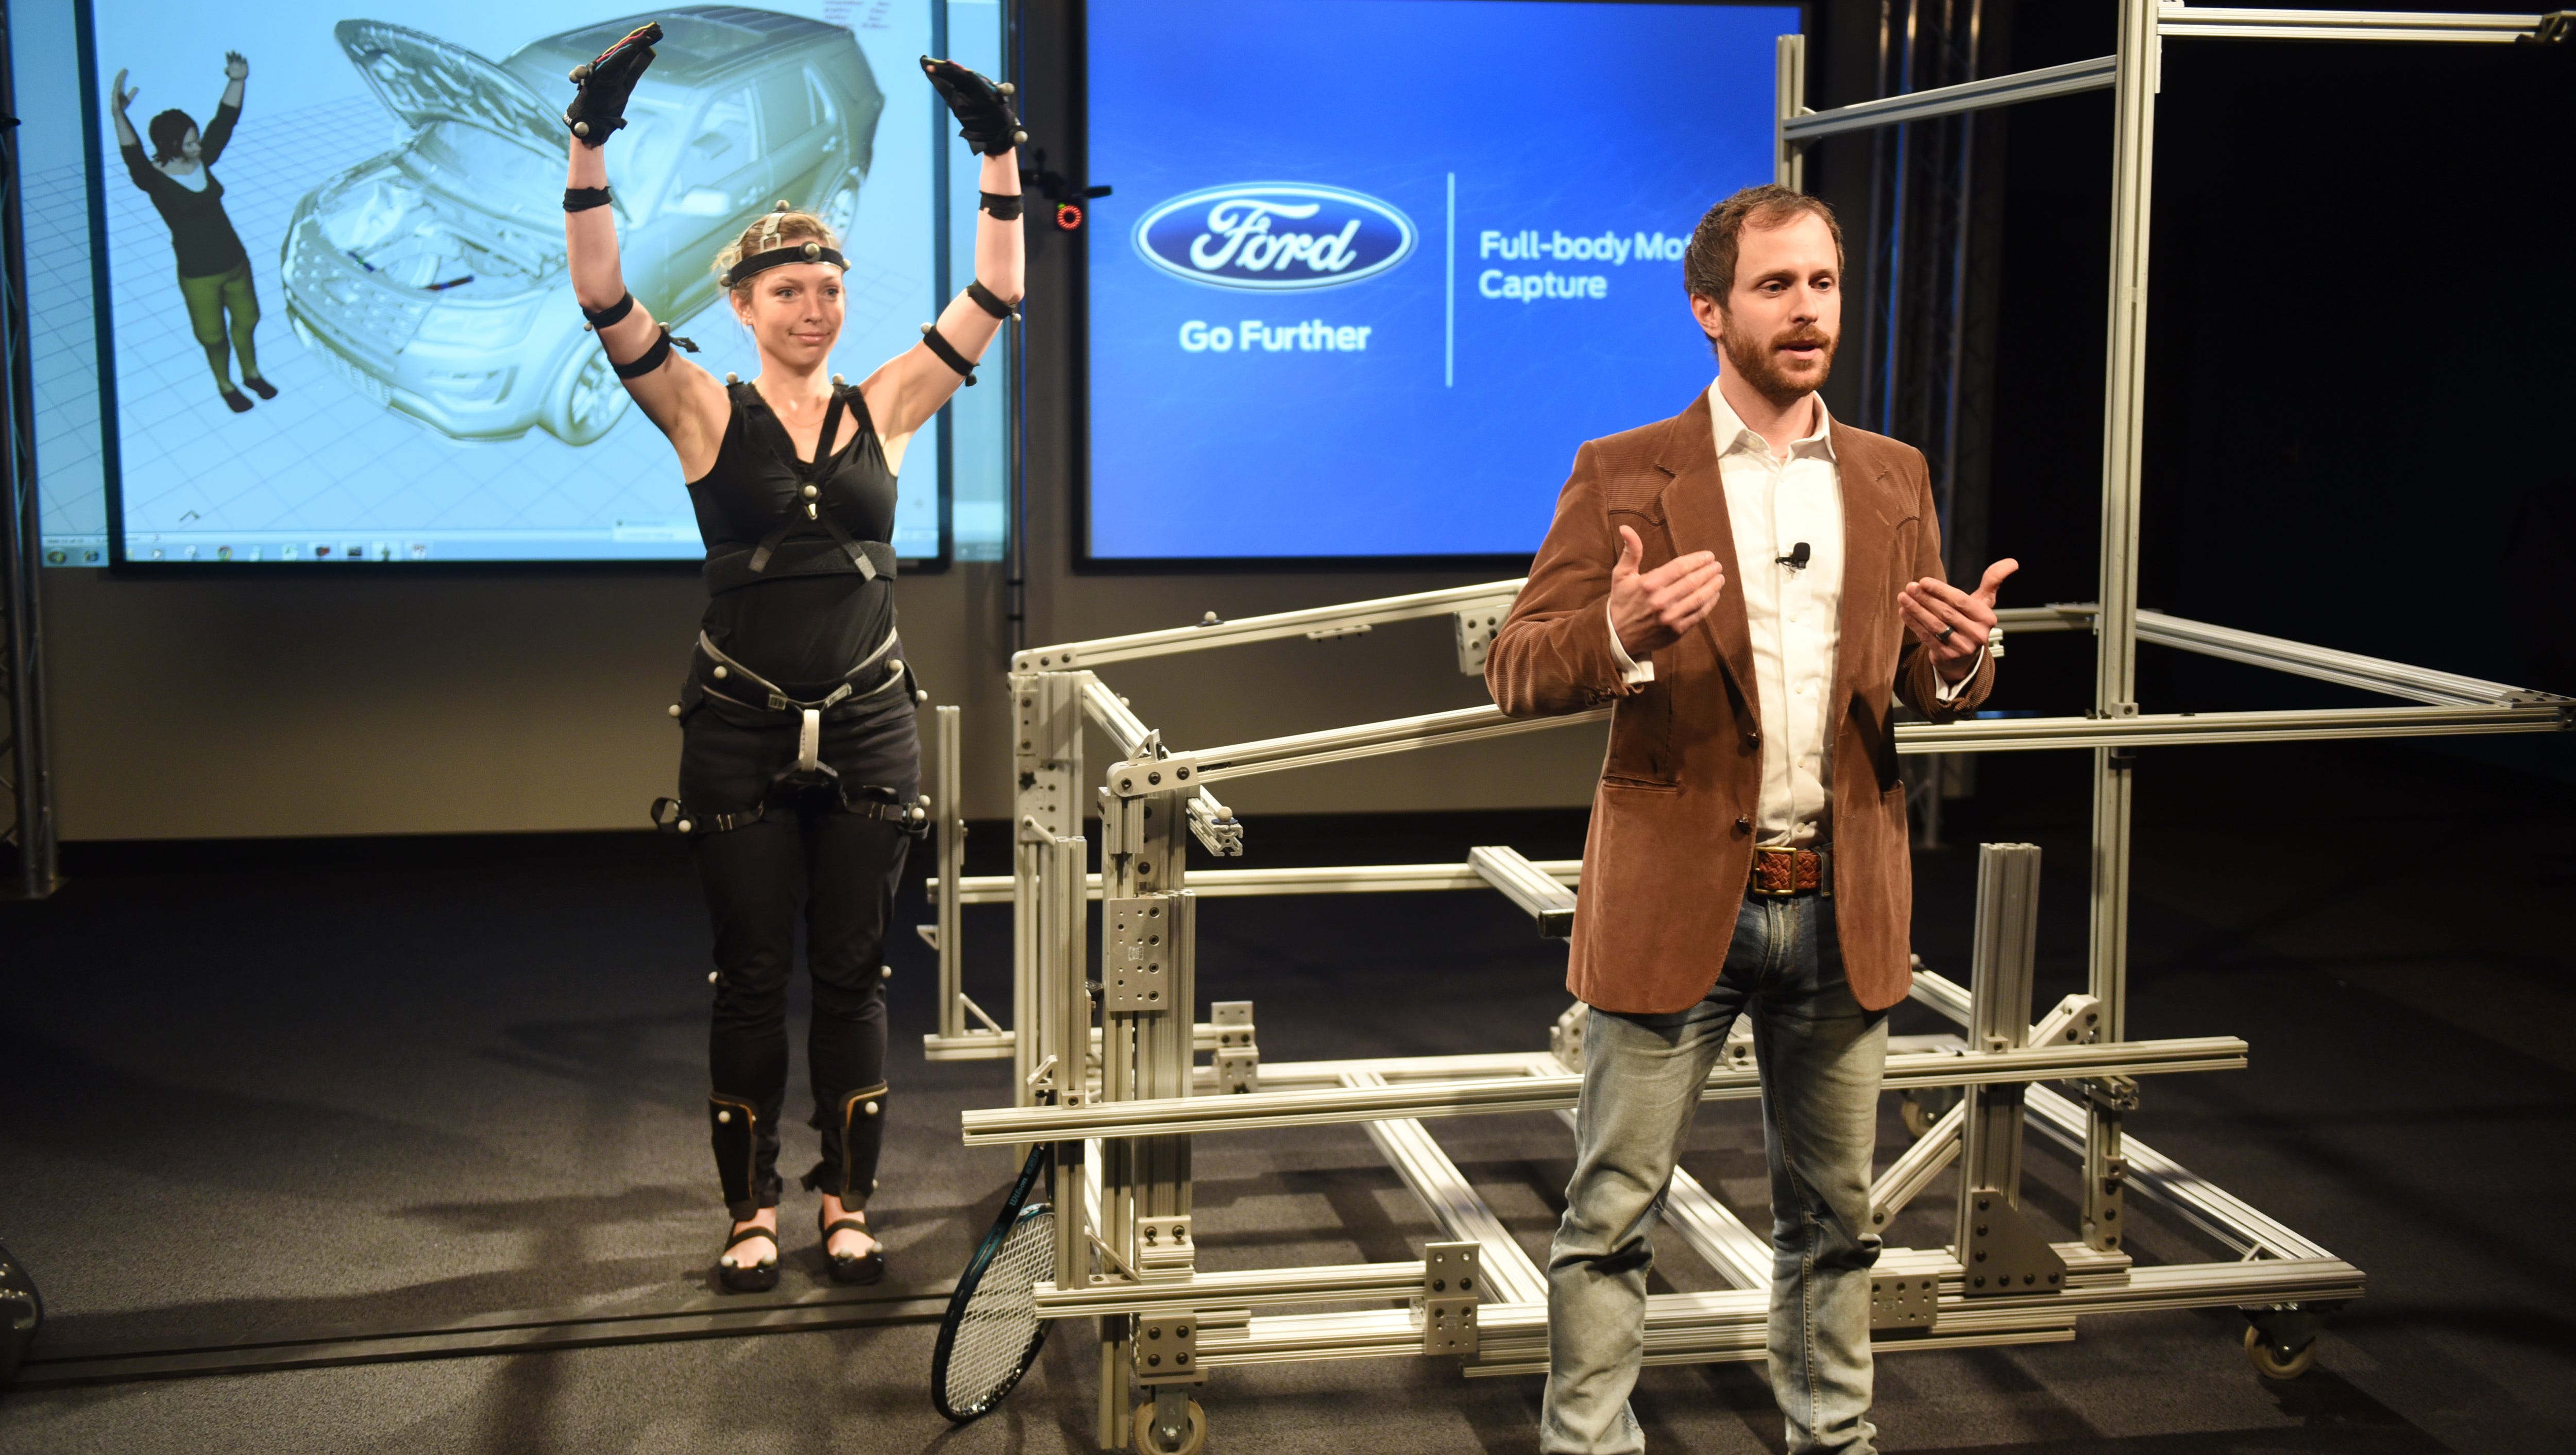 Ergonomics Engineer Marty Smets talks about Virtual Manufacturing Technology, which reduces production line injuries, as Ergonomist Kali Gawinski demonstrates the full body motion capture.